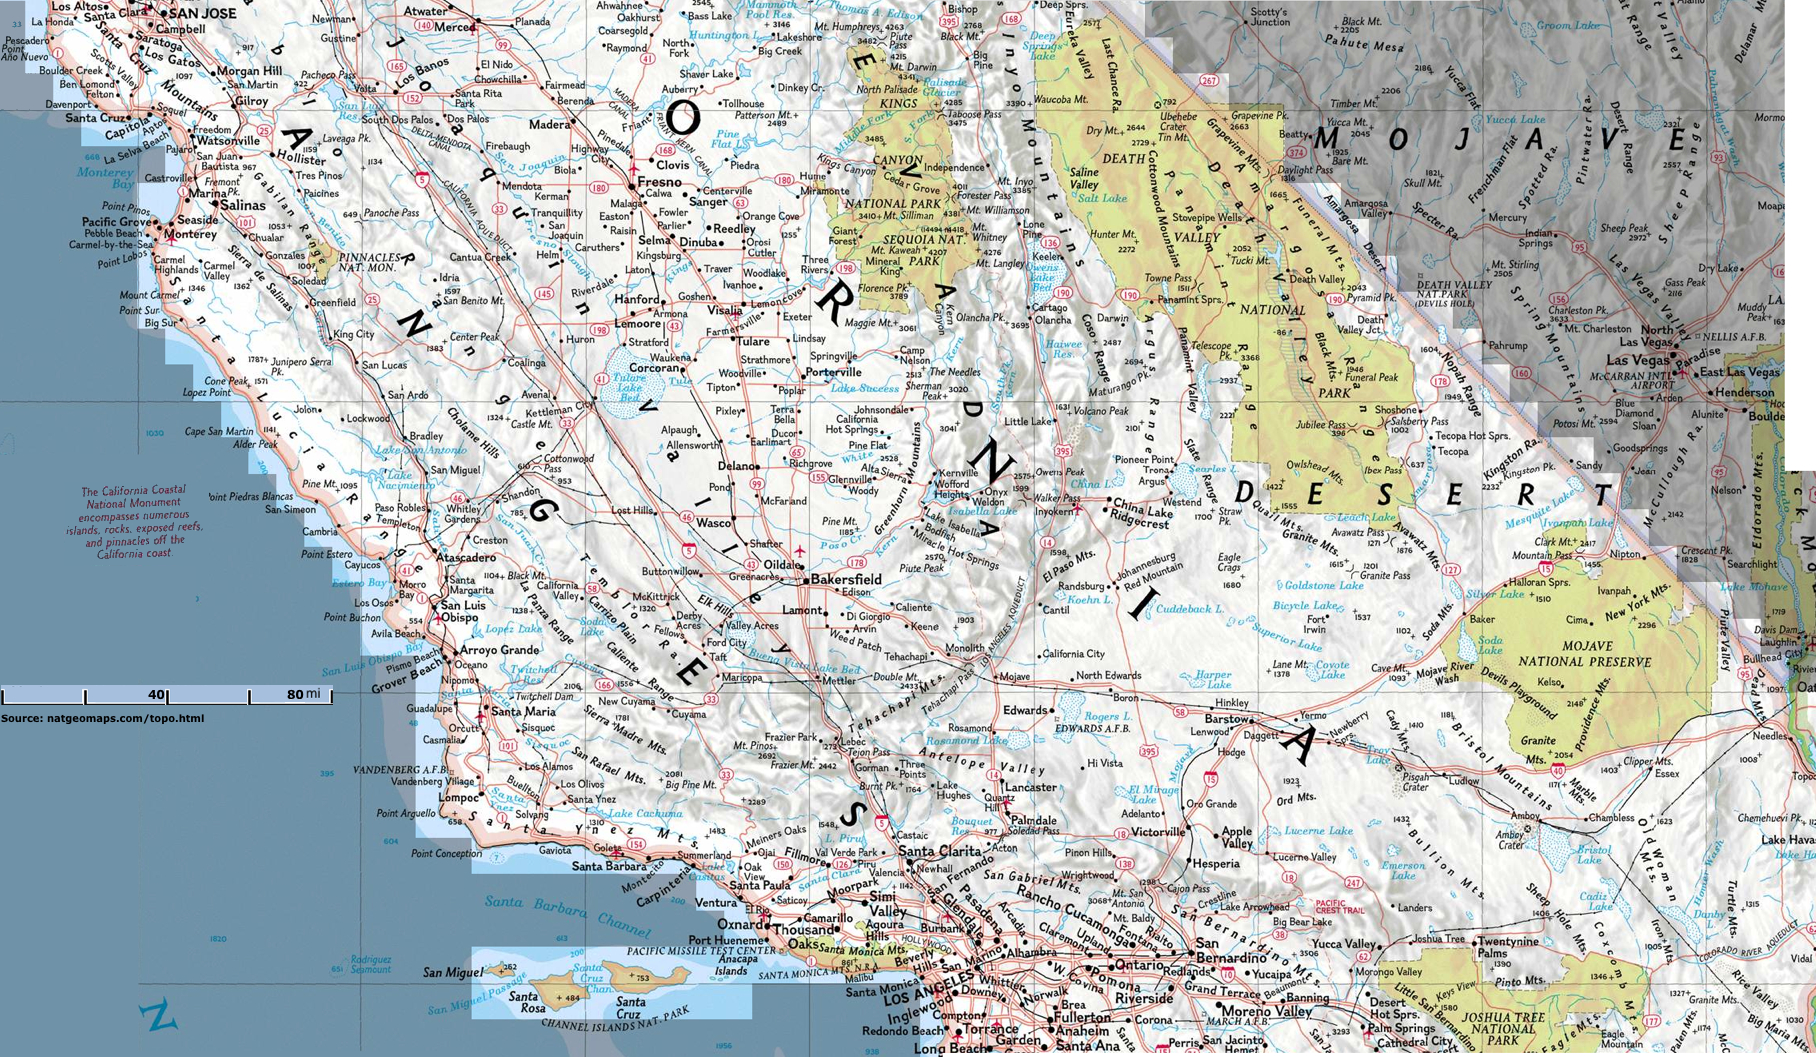 South Central California - National Geographic Topo Maps California